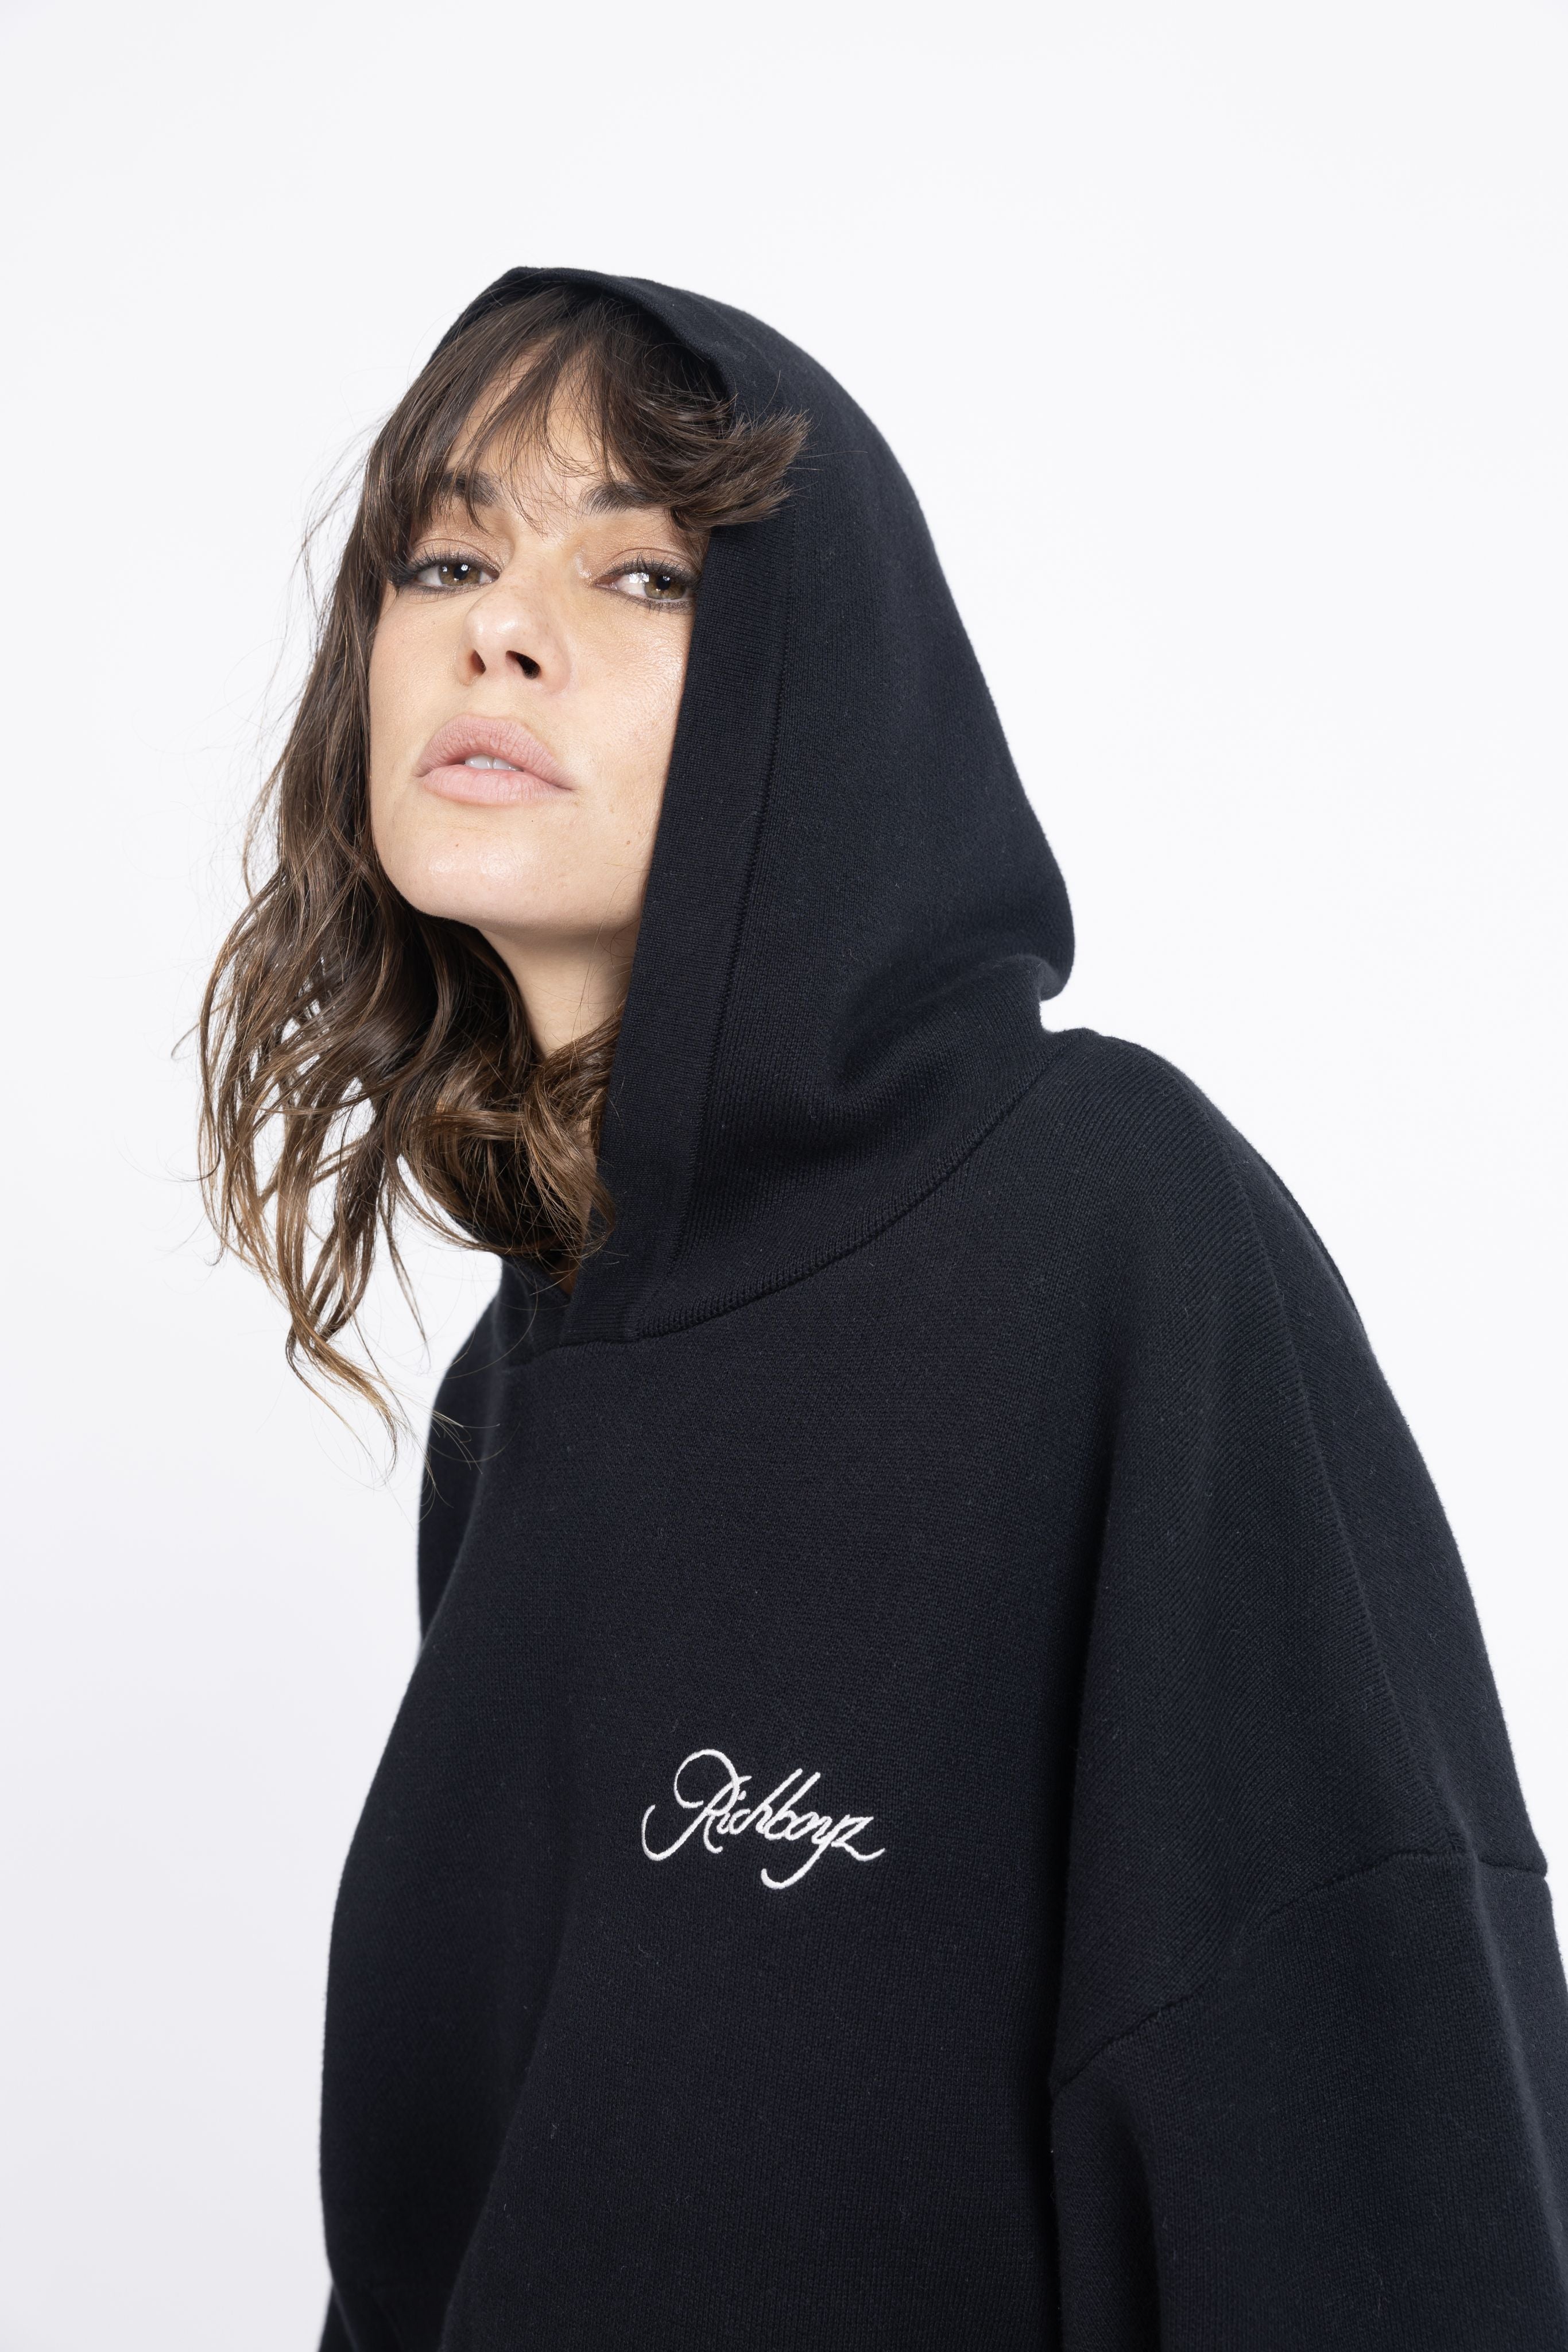 Knitted Hoodie - Obsidian